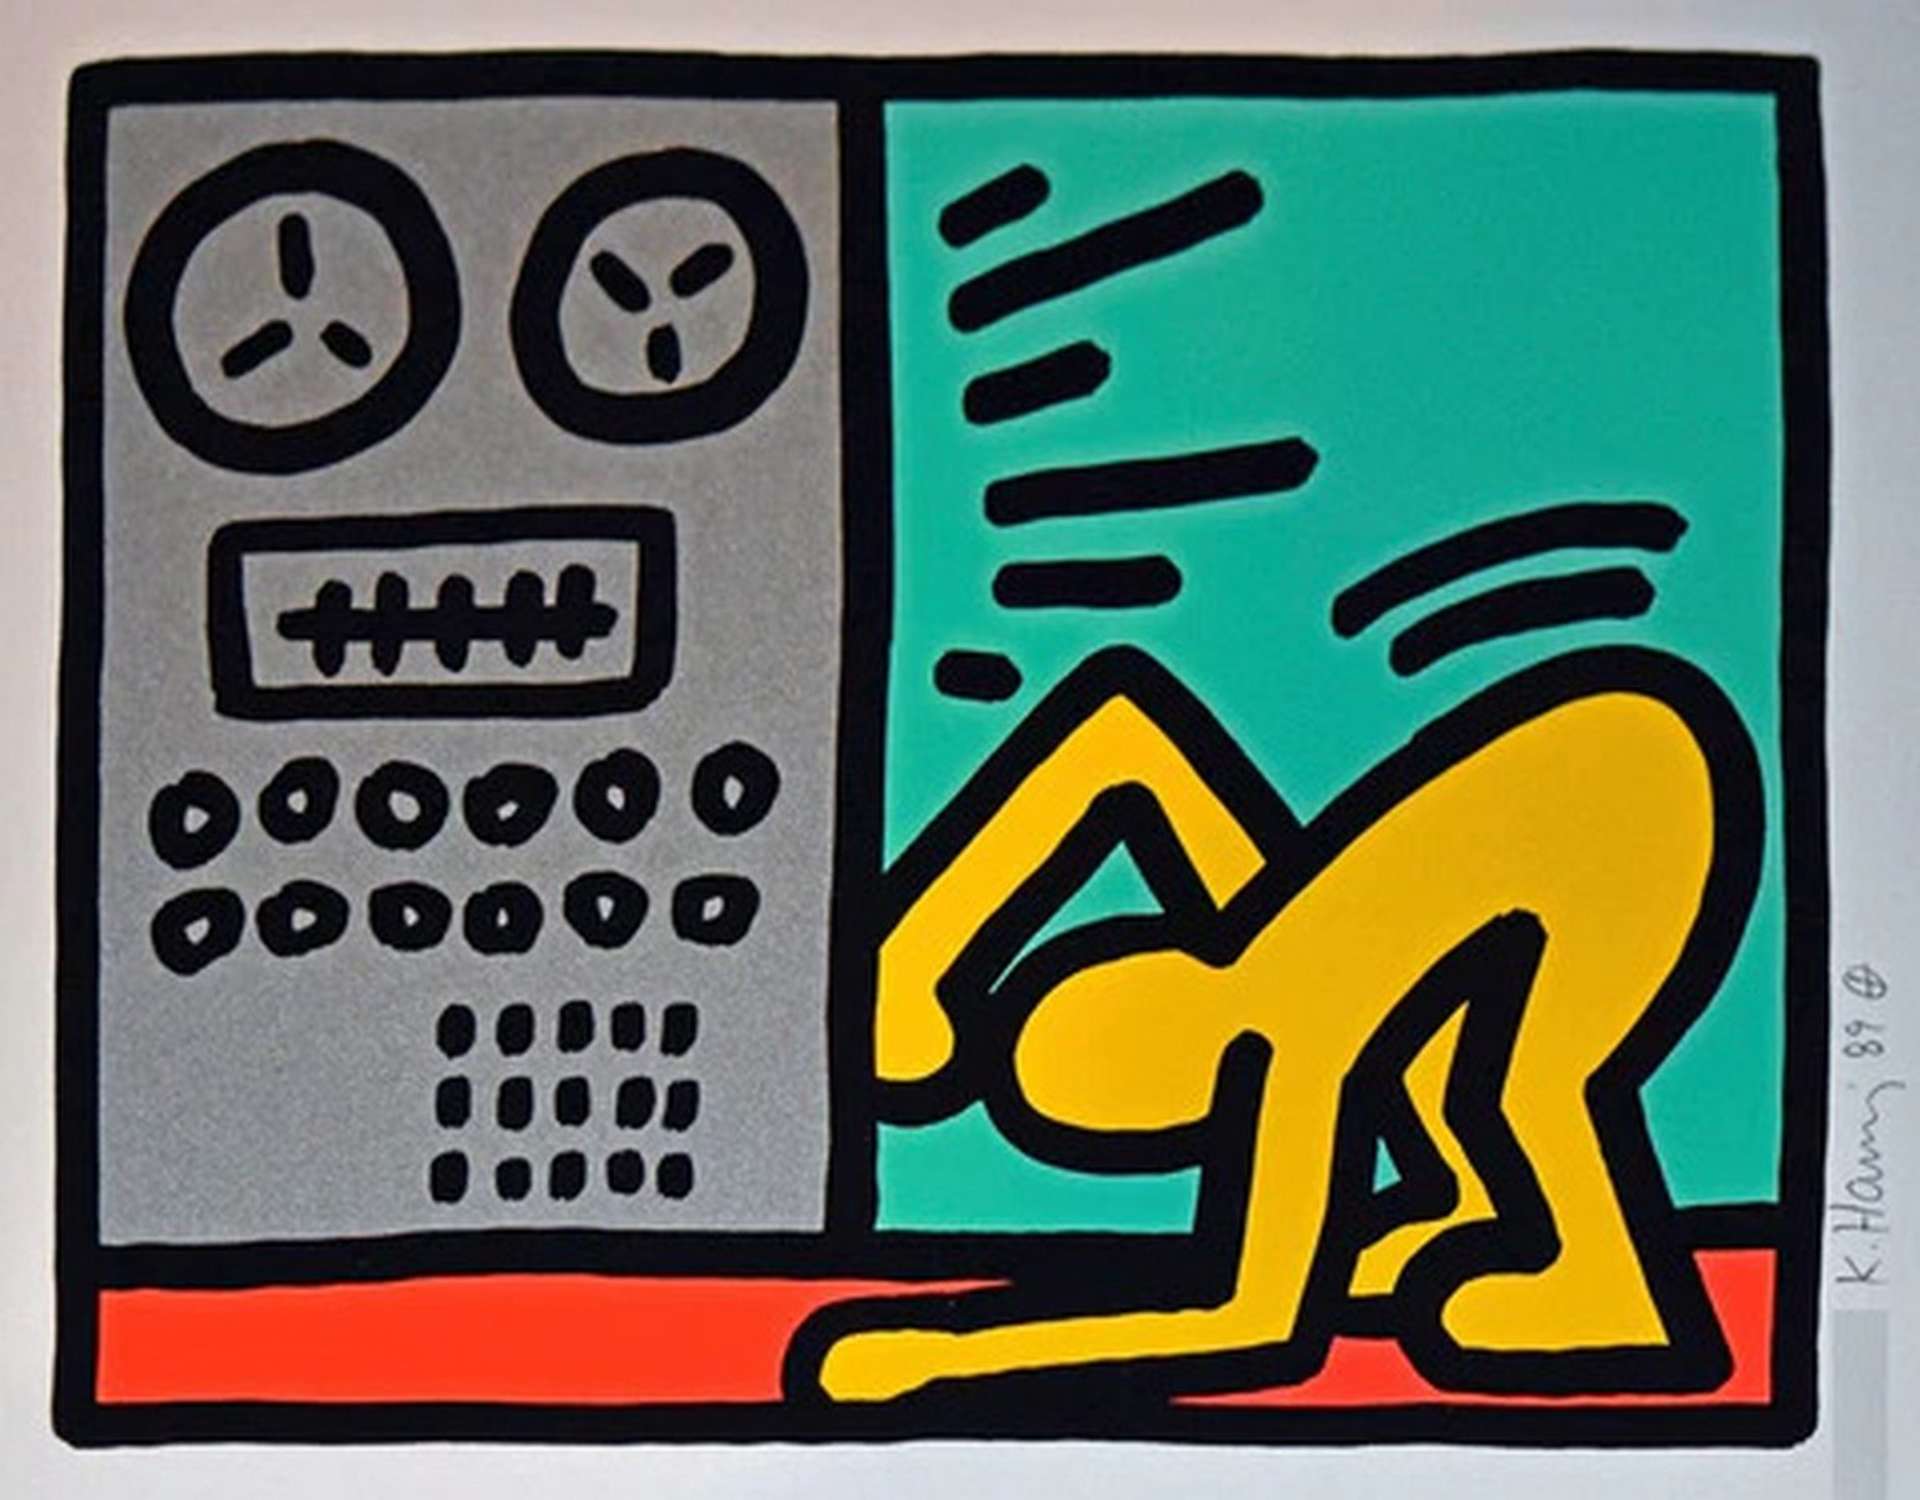 Keith Haring’s Pop Shop III. A yellow figure dancing while listening to music in the Street Art style of Keith Haring